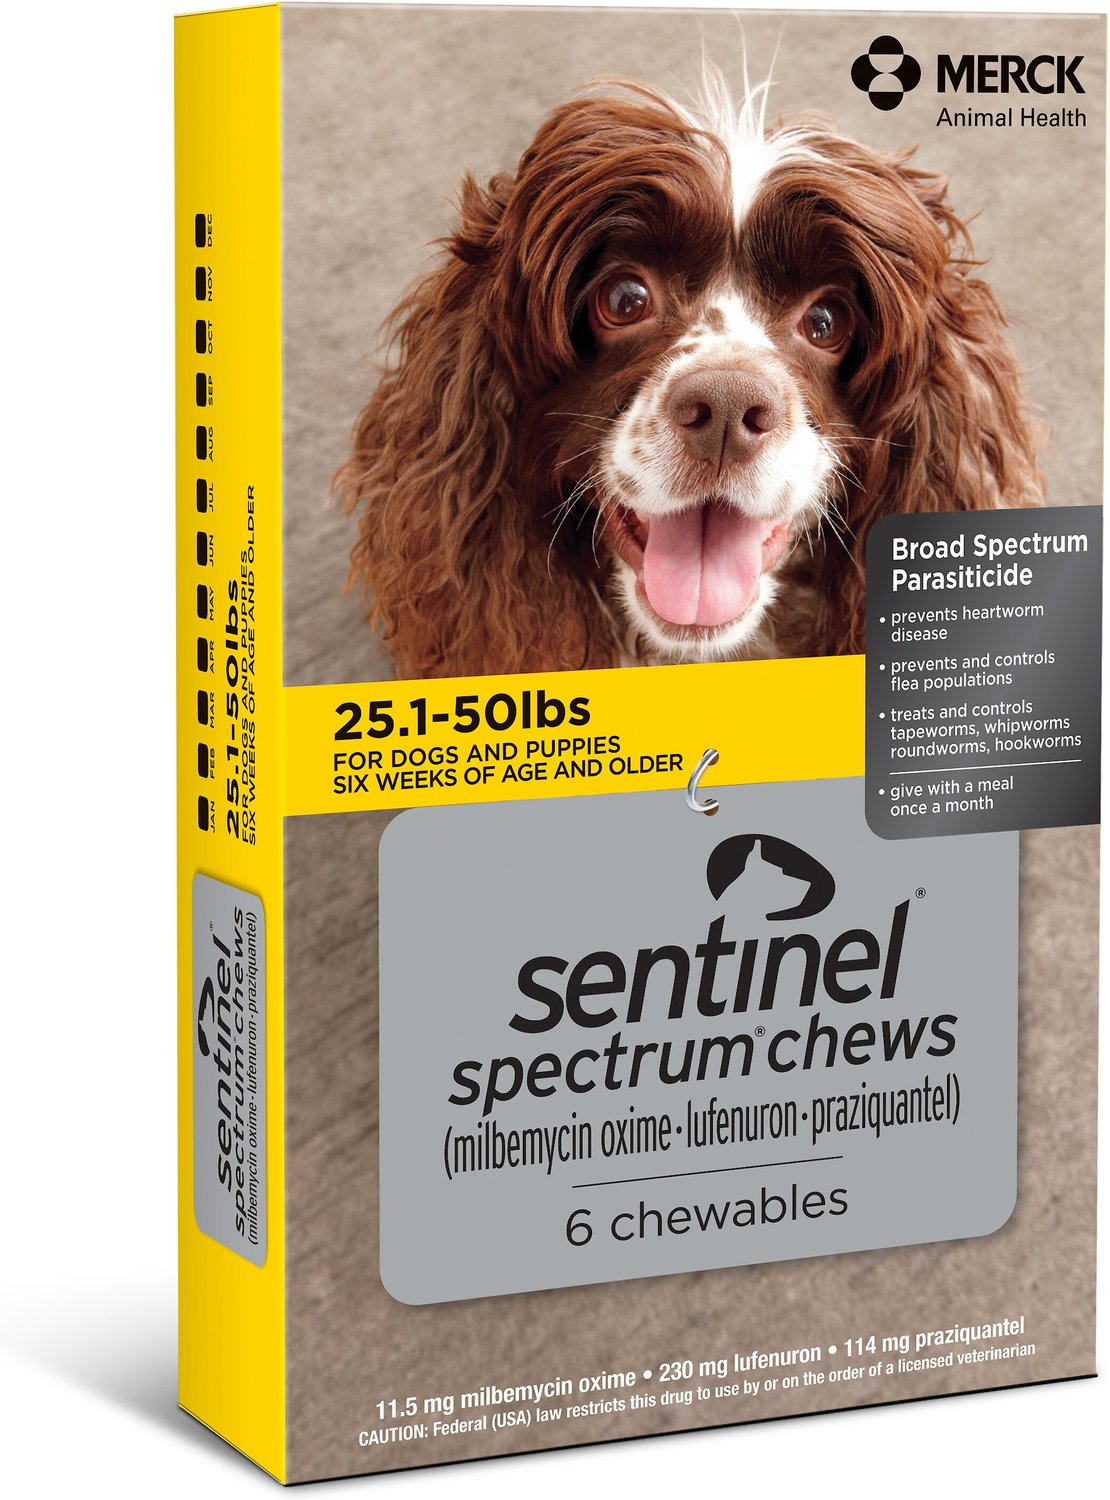 Sentinel Spectrum Chewable Tablets For Dogs 25 1 50 Lbs 6 Treatments 